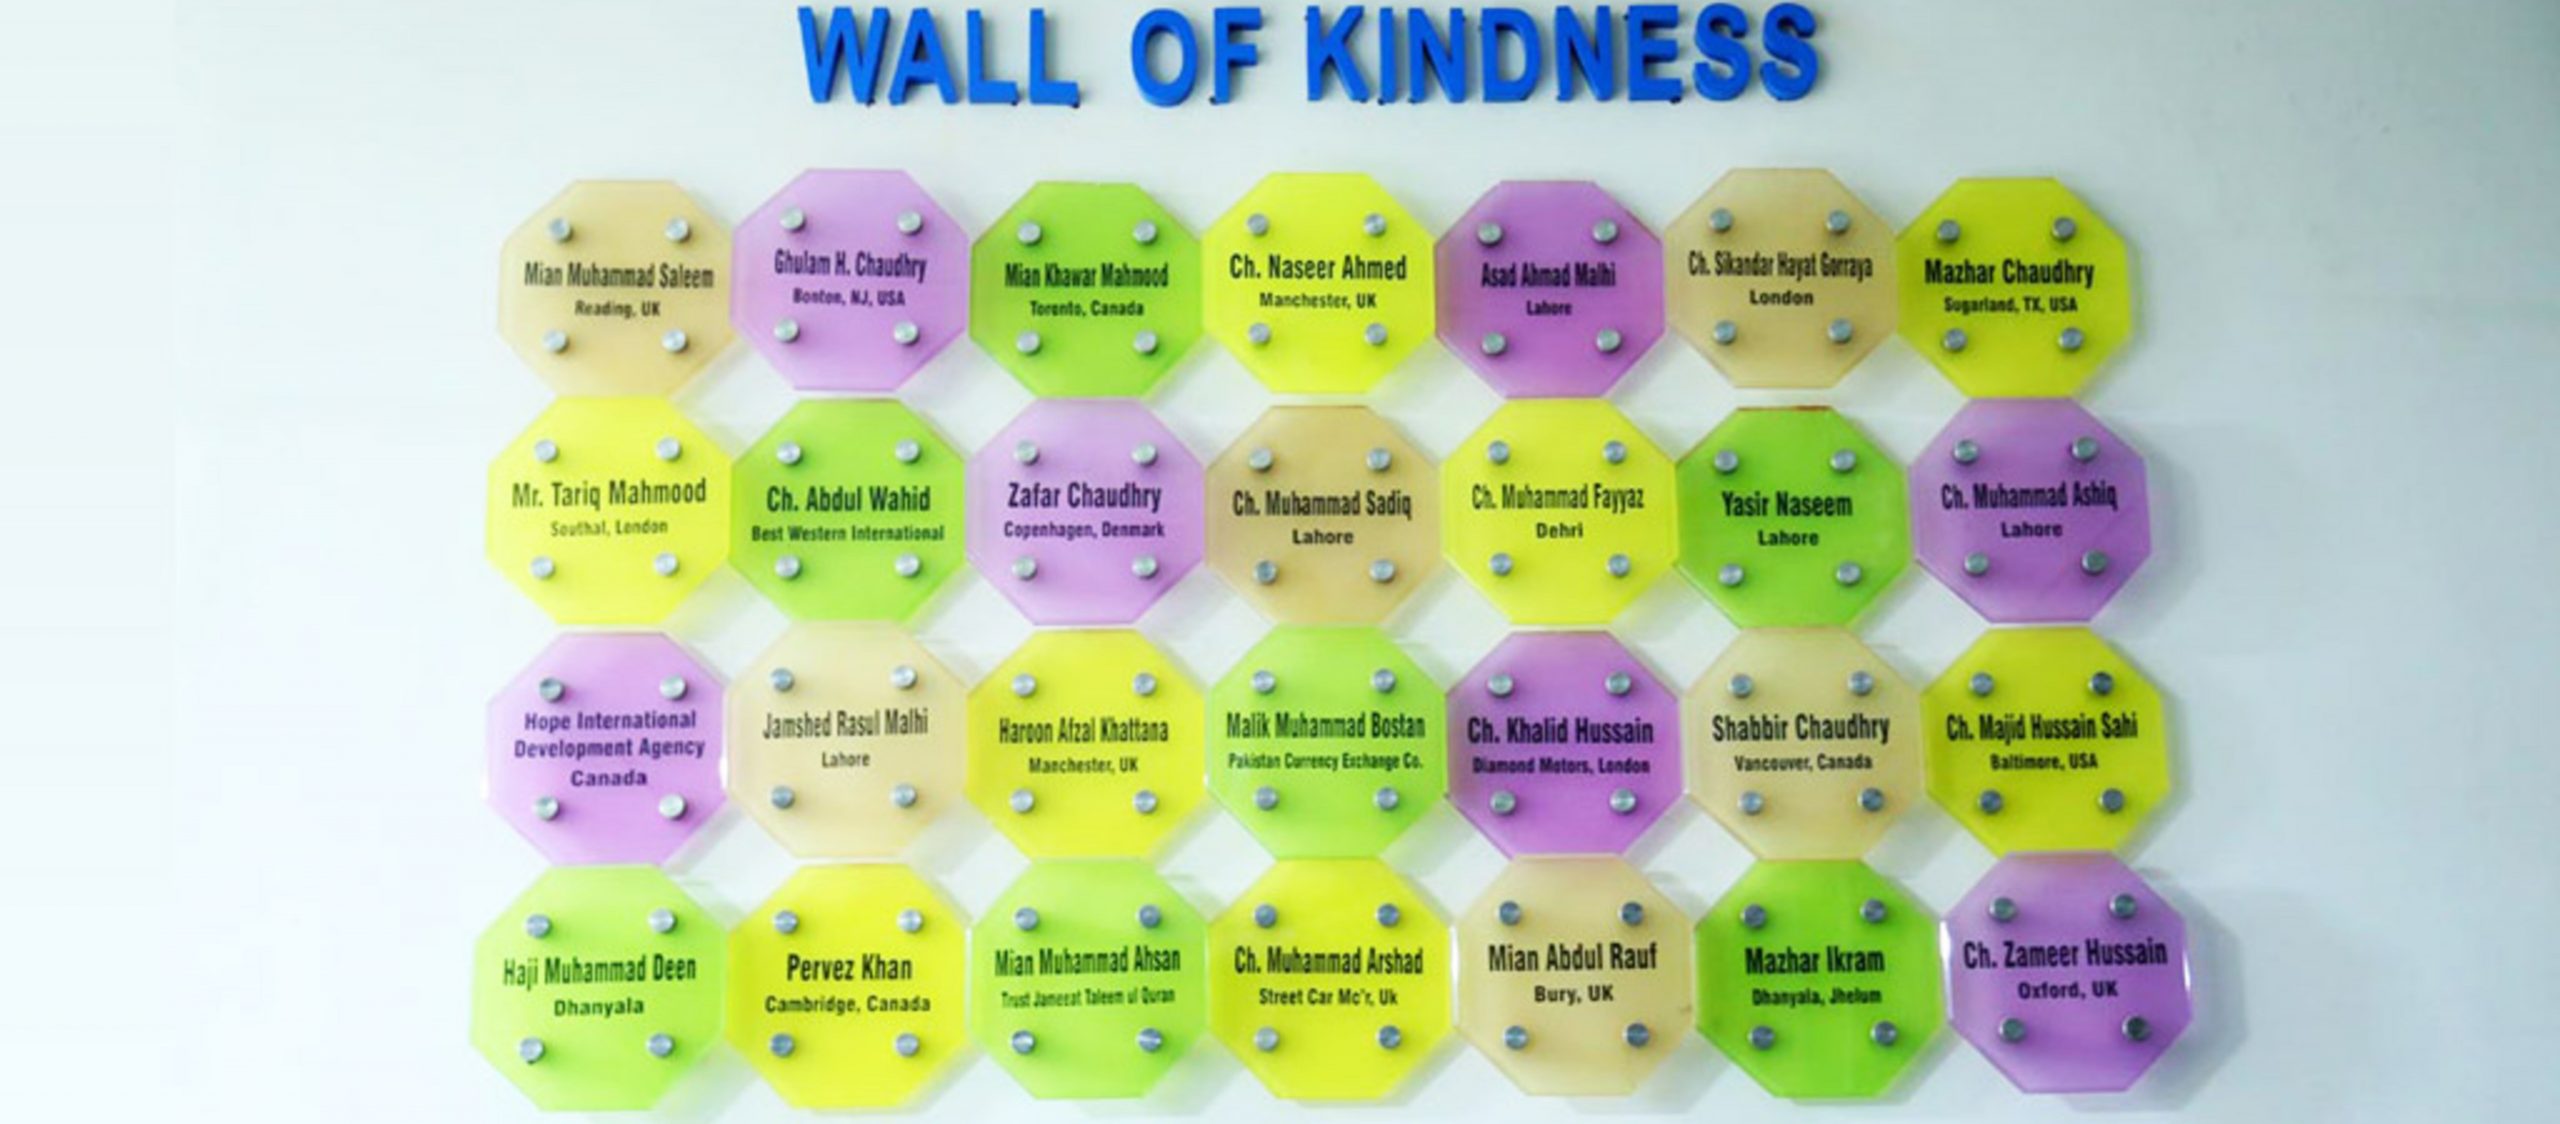 Wall of kindness